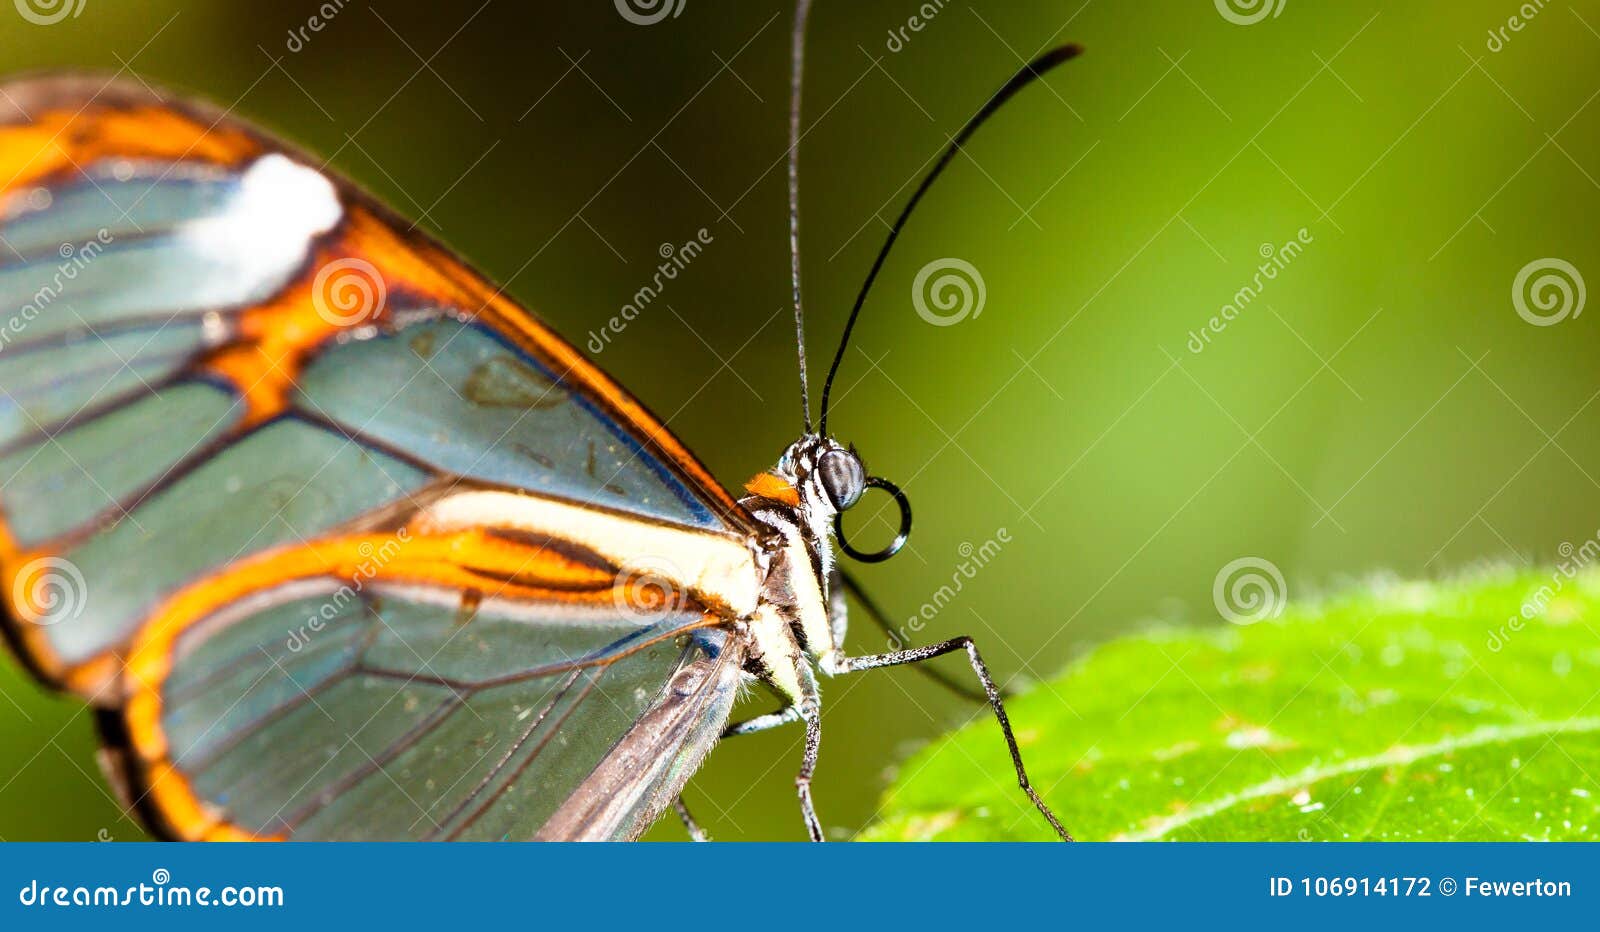 details of clearwing butterfly with transparent `glass` wings greta oto closeup